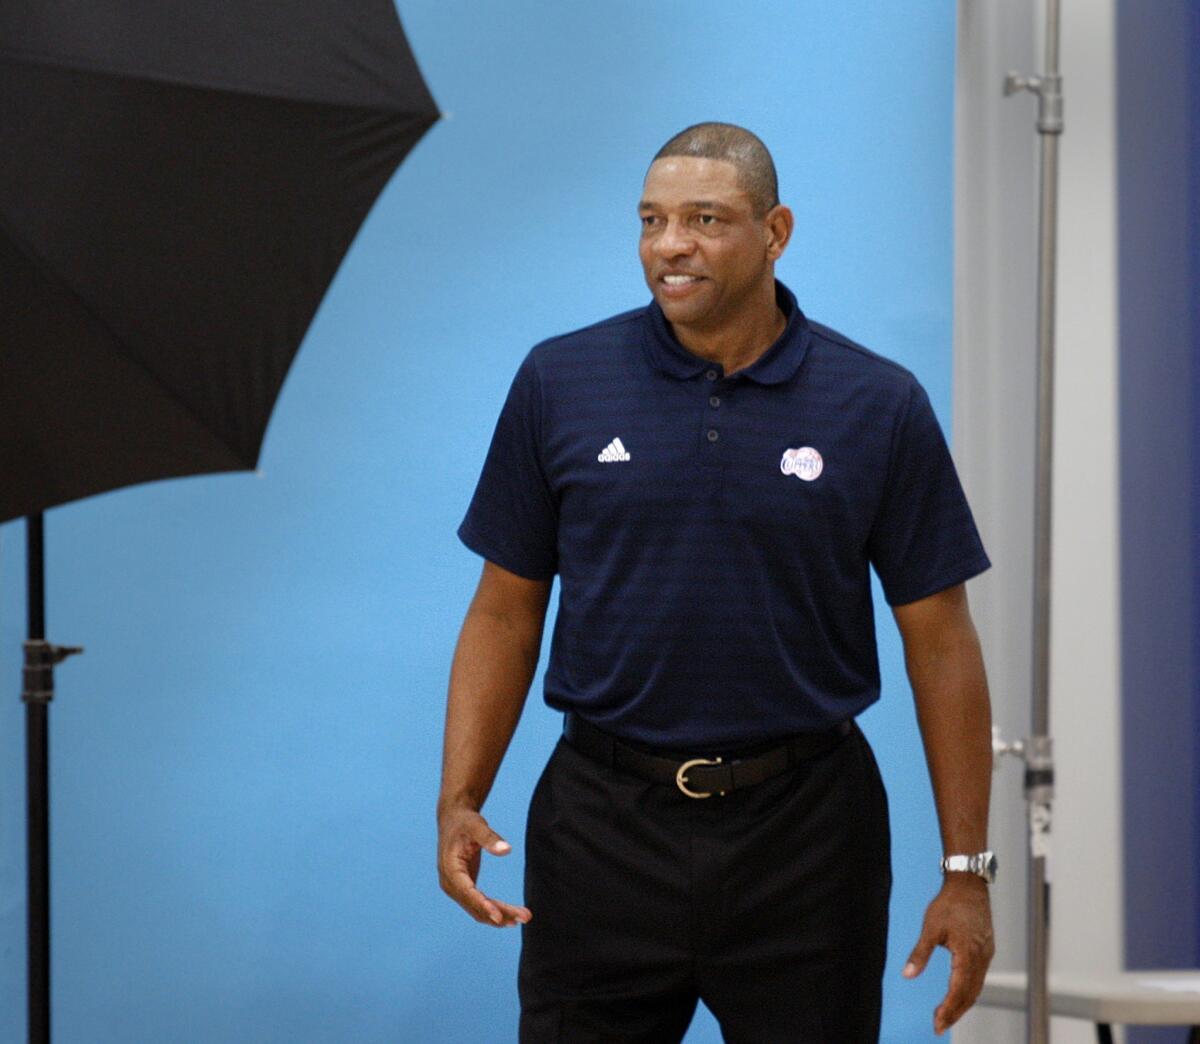 Clippers Coach Doc Rivers during Clippers media day Monday. The former Boston Celtics coach thinks highly of the Lakers.